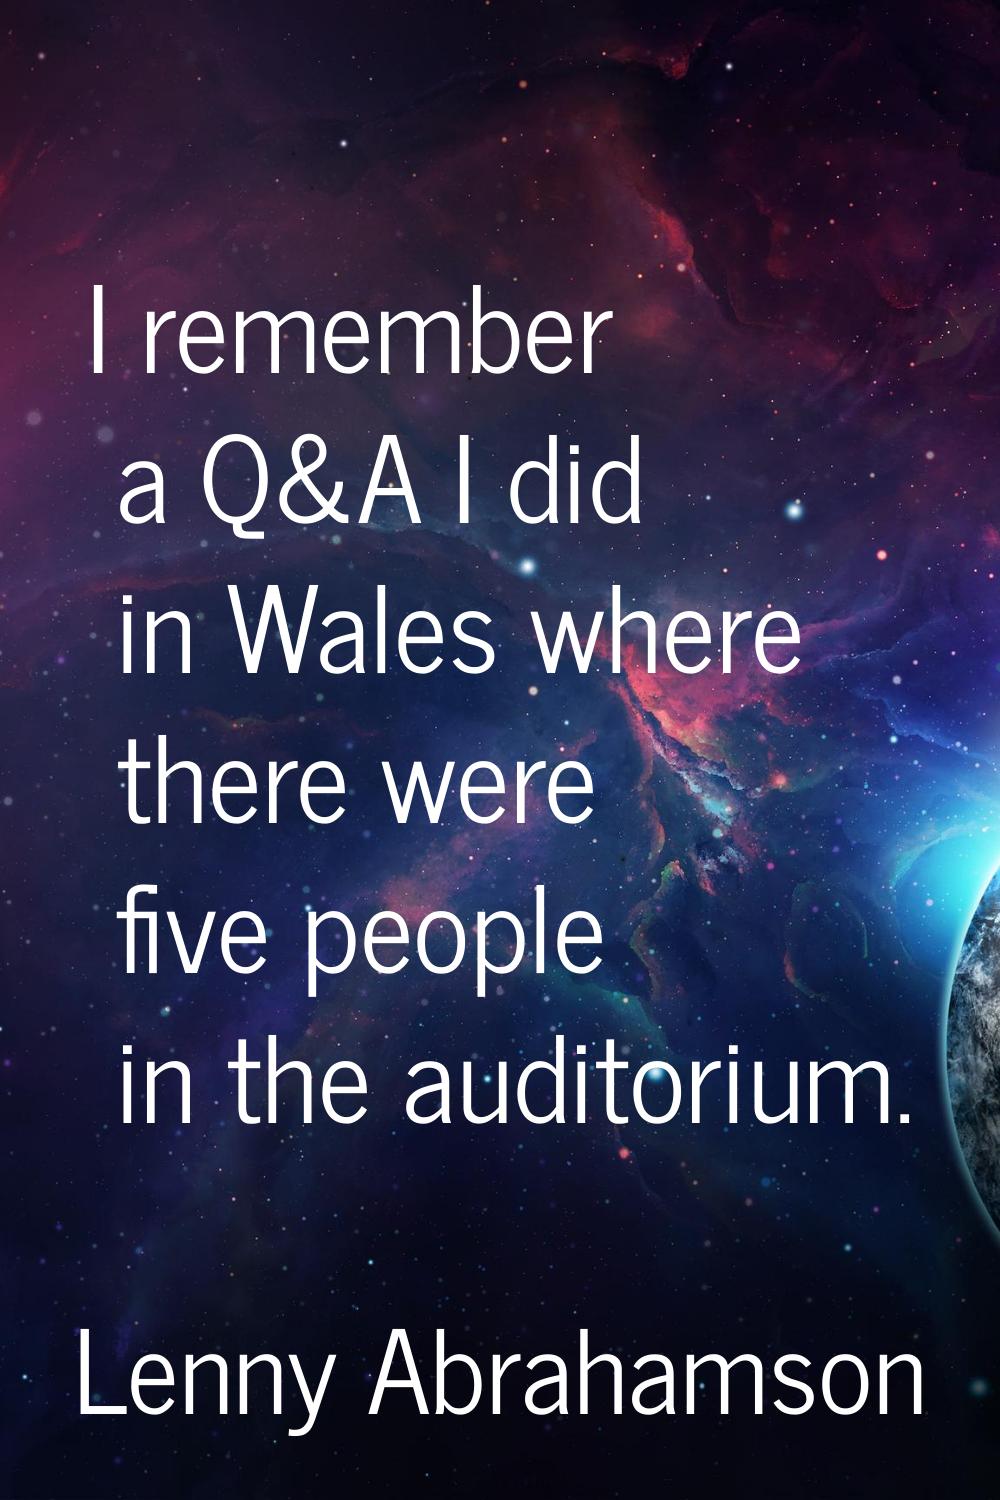 I remember a Q&A I did in Wales where there were five people in the auditorium.